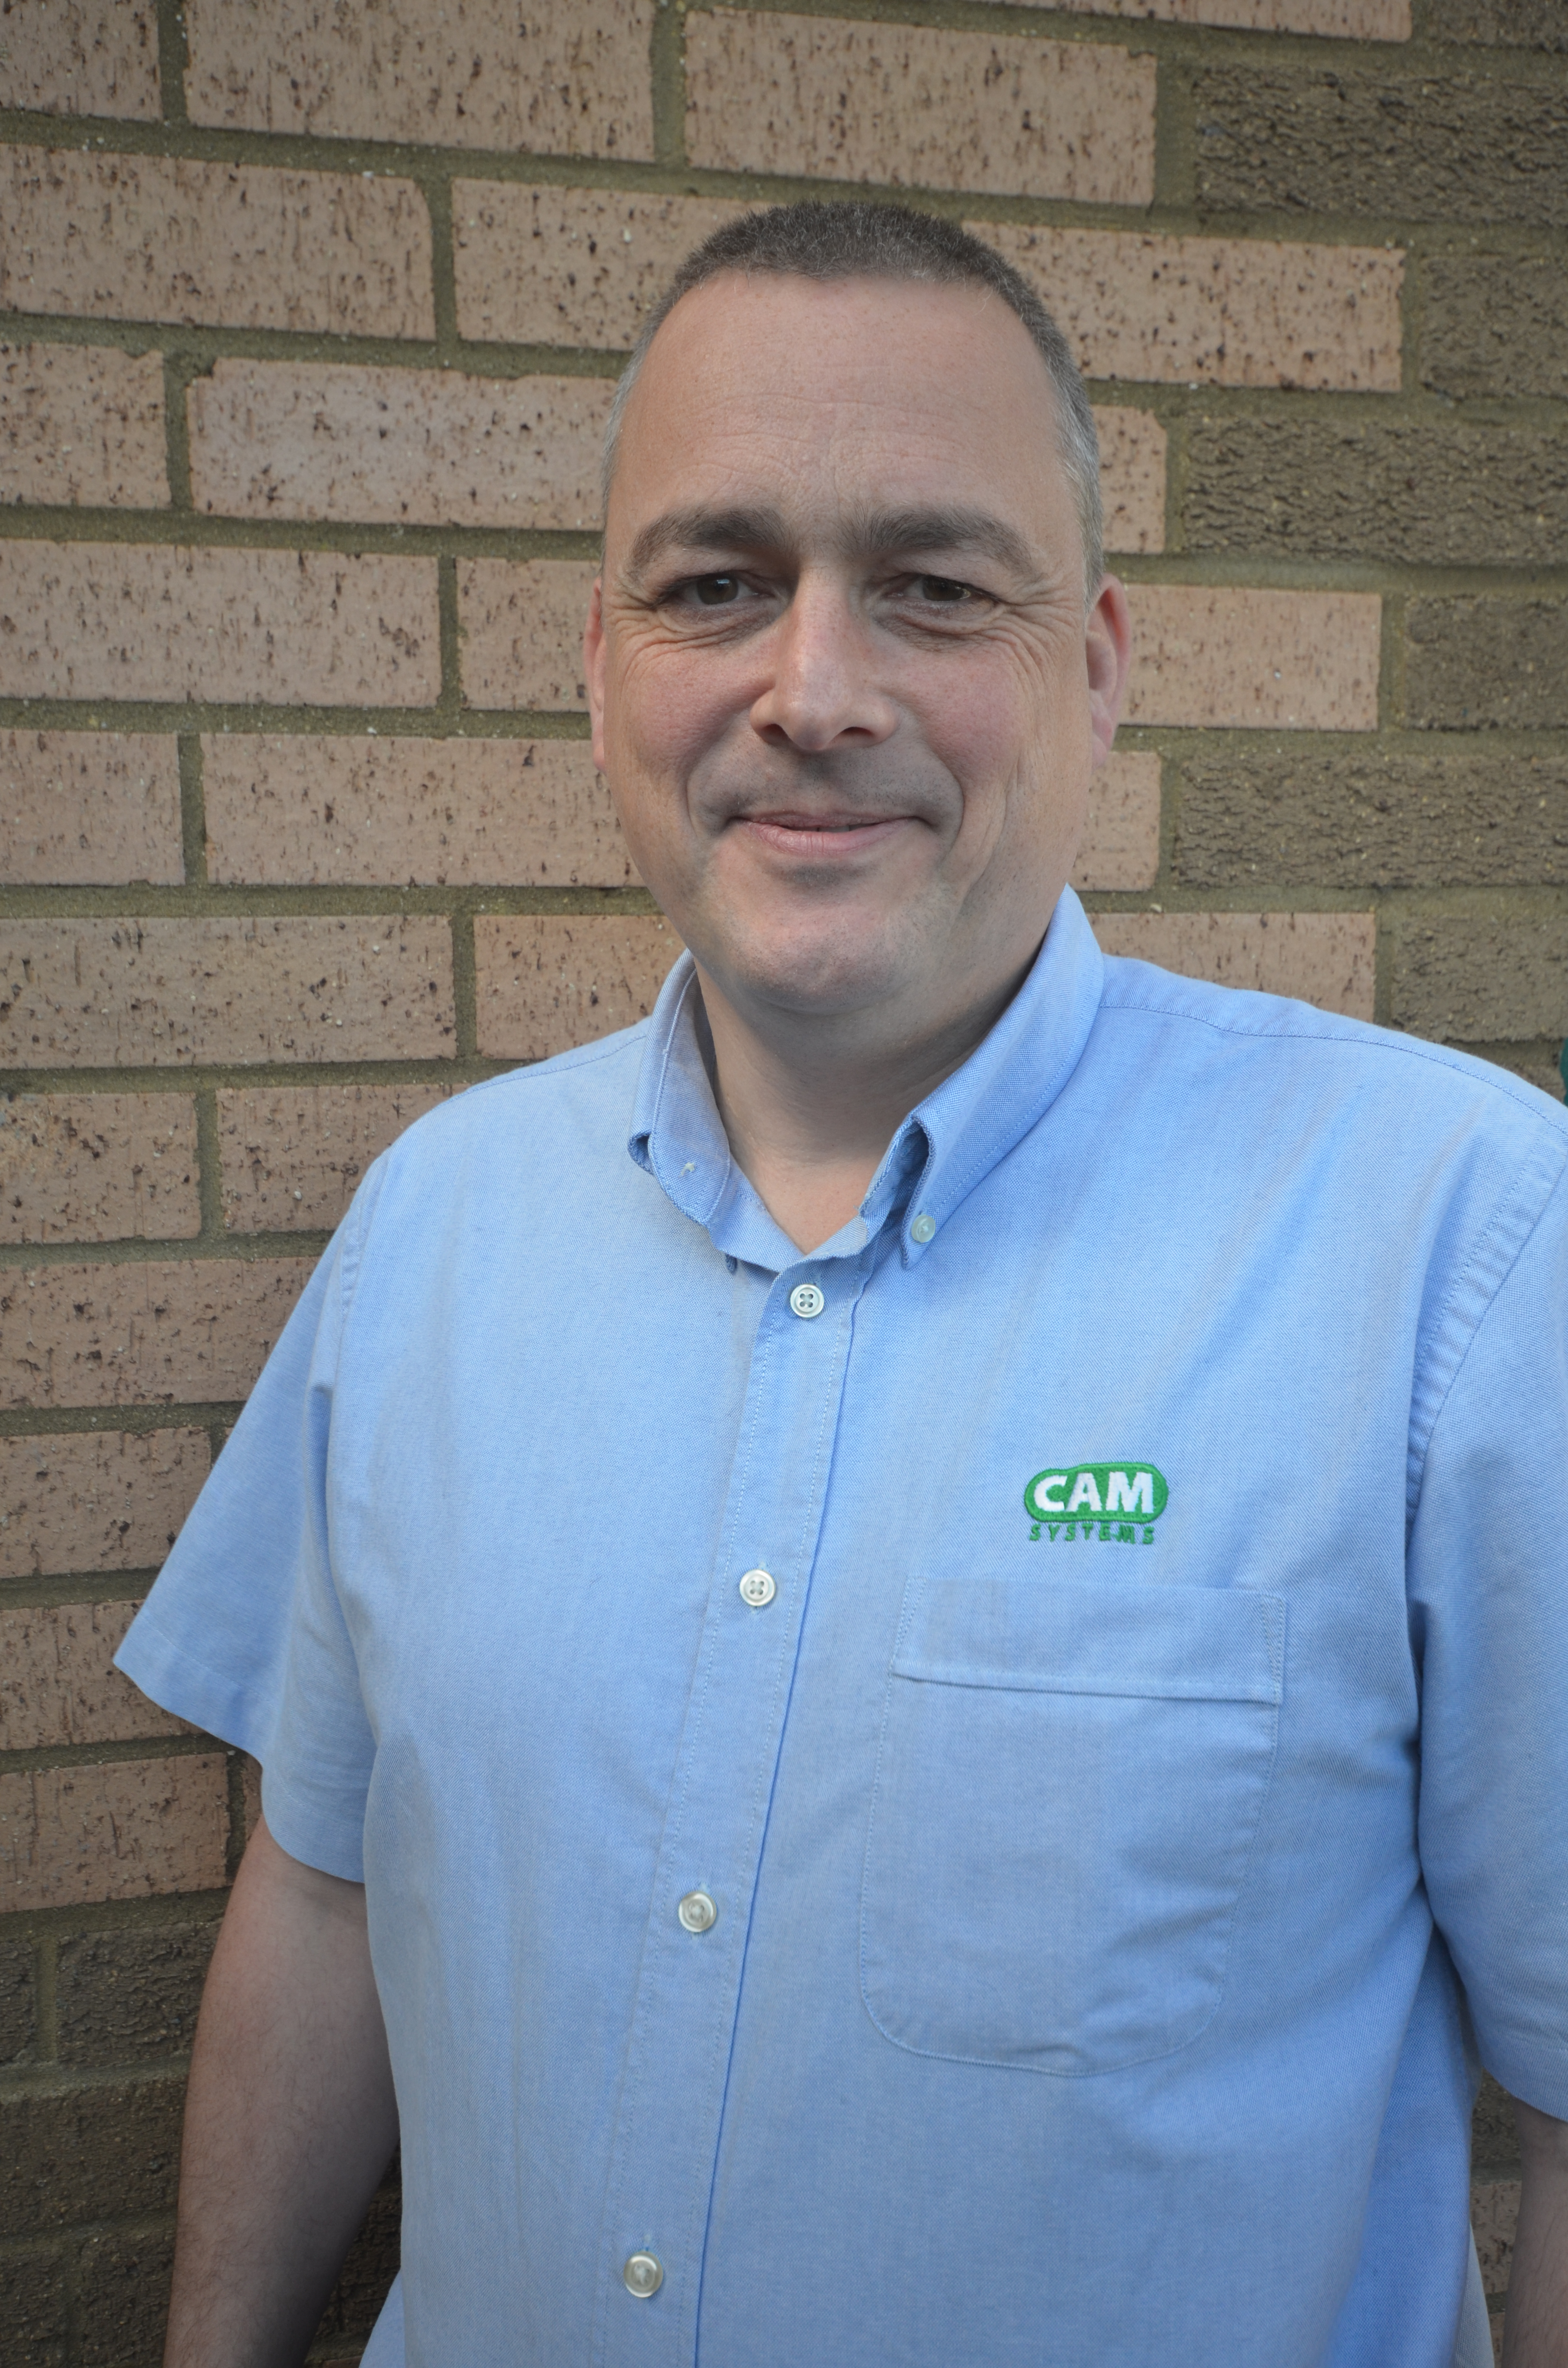 Cam Systems appoints technical account manager